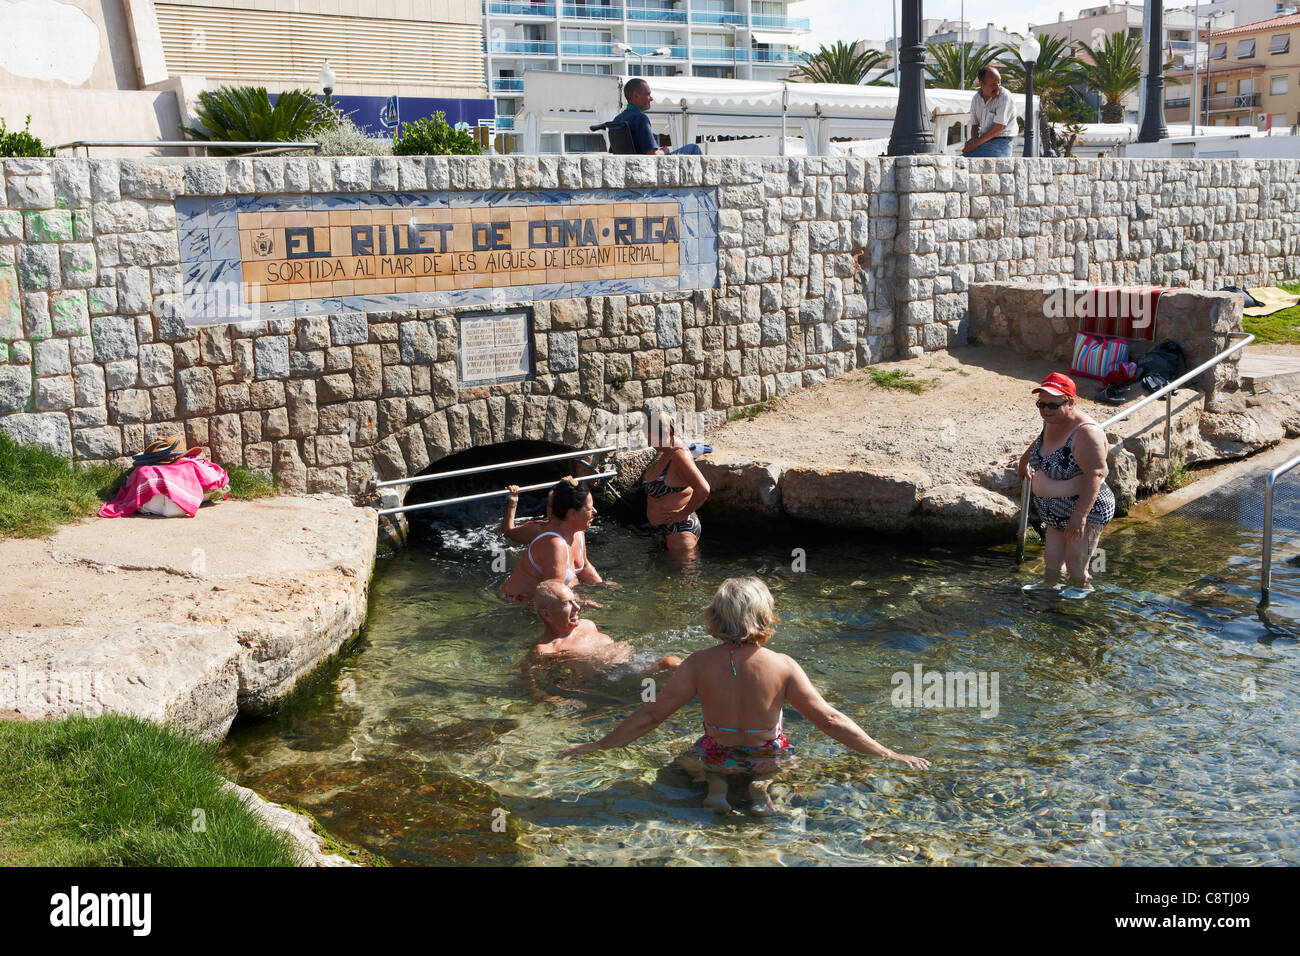 Thermal spring outlet at Coma Ruga beach. El Vendrell, Catalonia, Spain. Stock Photo